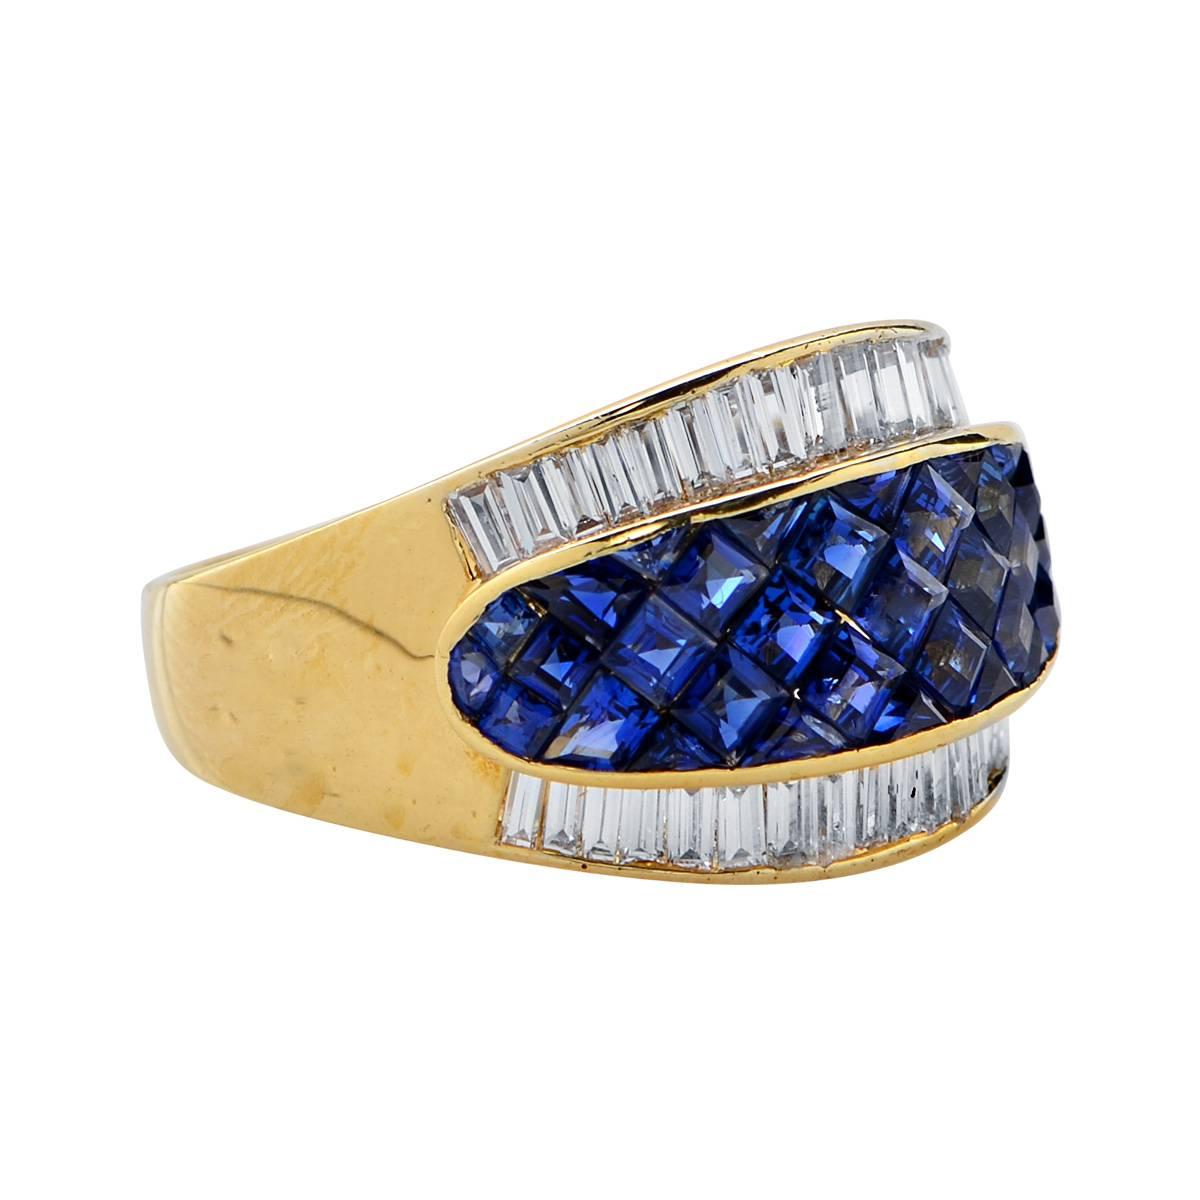 Striking band crafted in 18 karat yellow gold featuring 35 square cut sapphires weighing approximately 2.73 carats total, accented by 36 baguette cut diamonds weighing approximately 1.07 carats total, F color VS clarity. This stunning band is a size